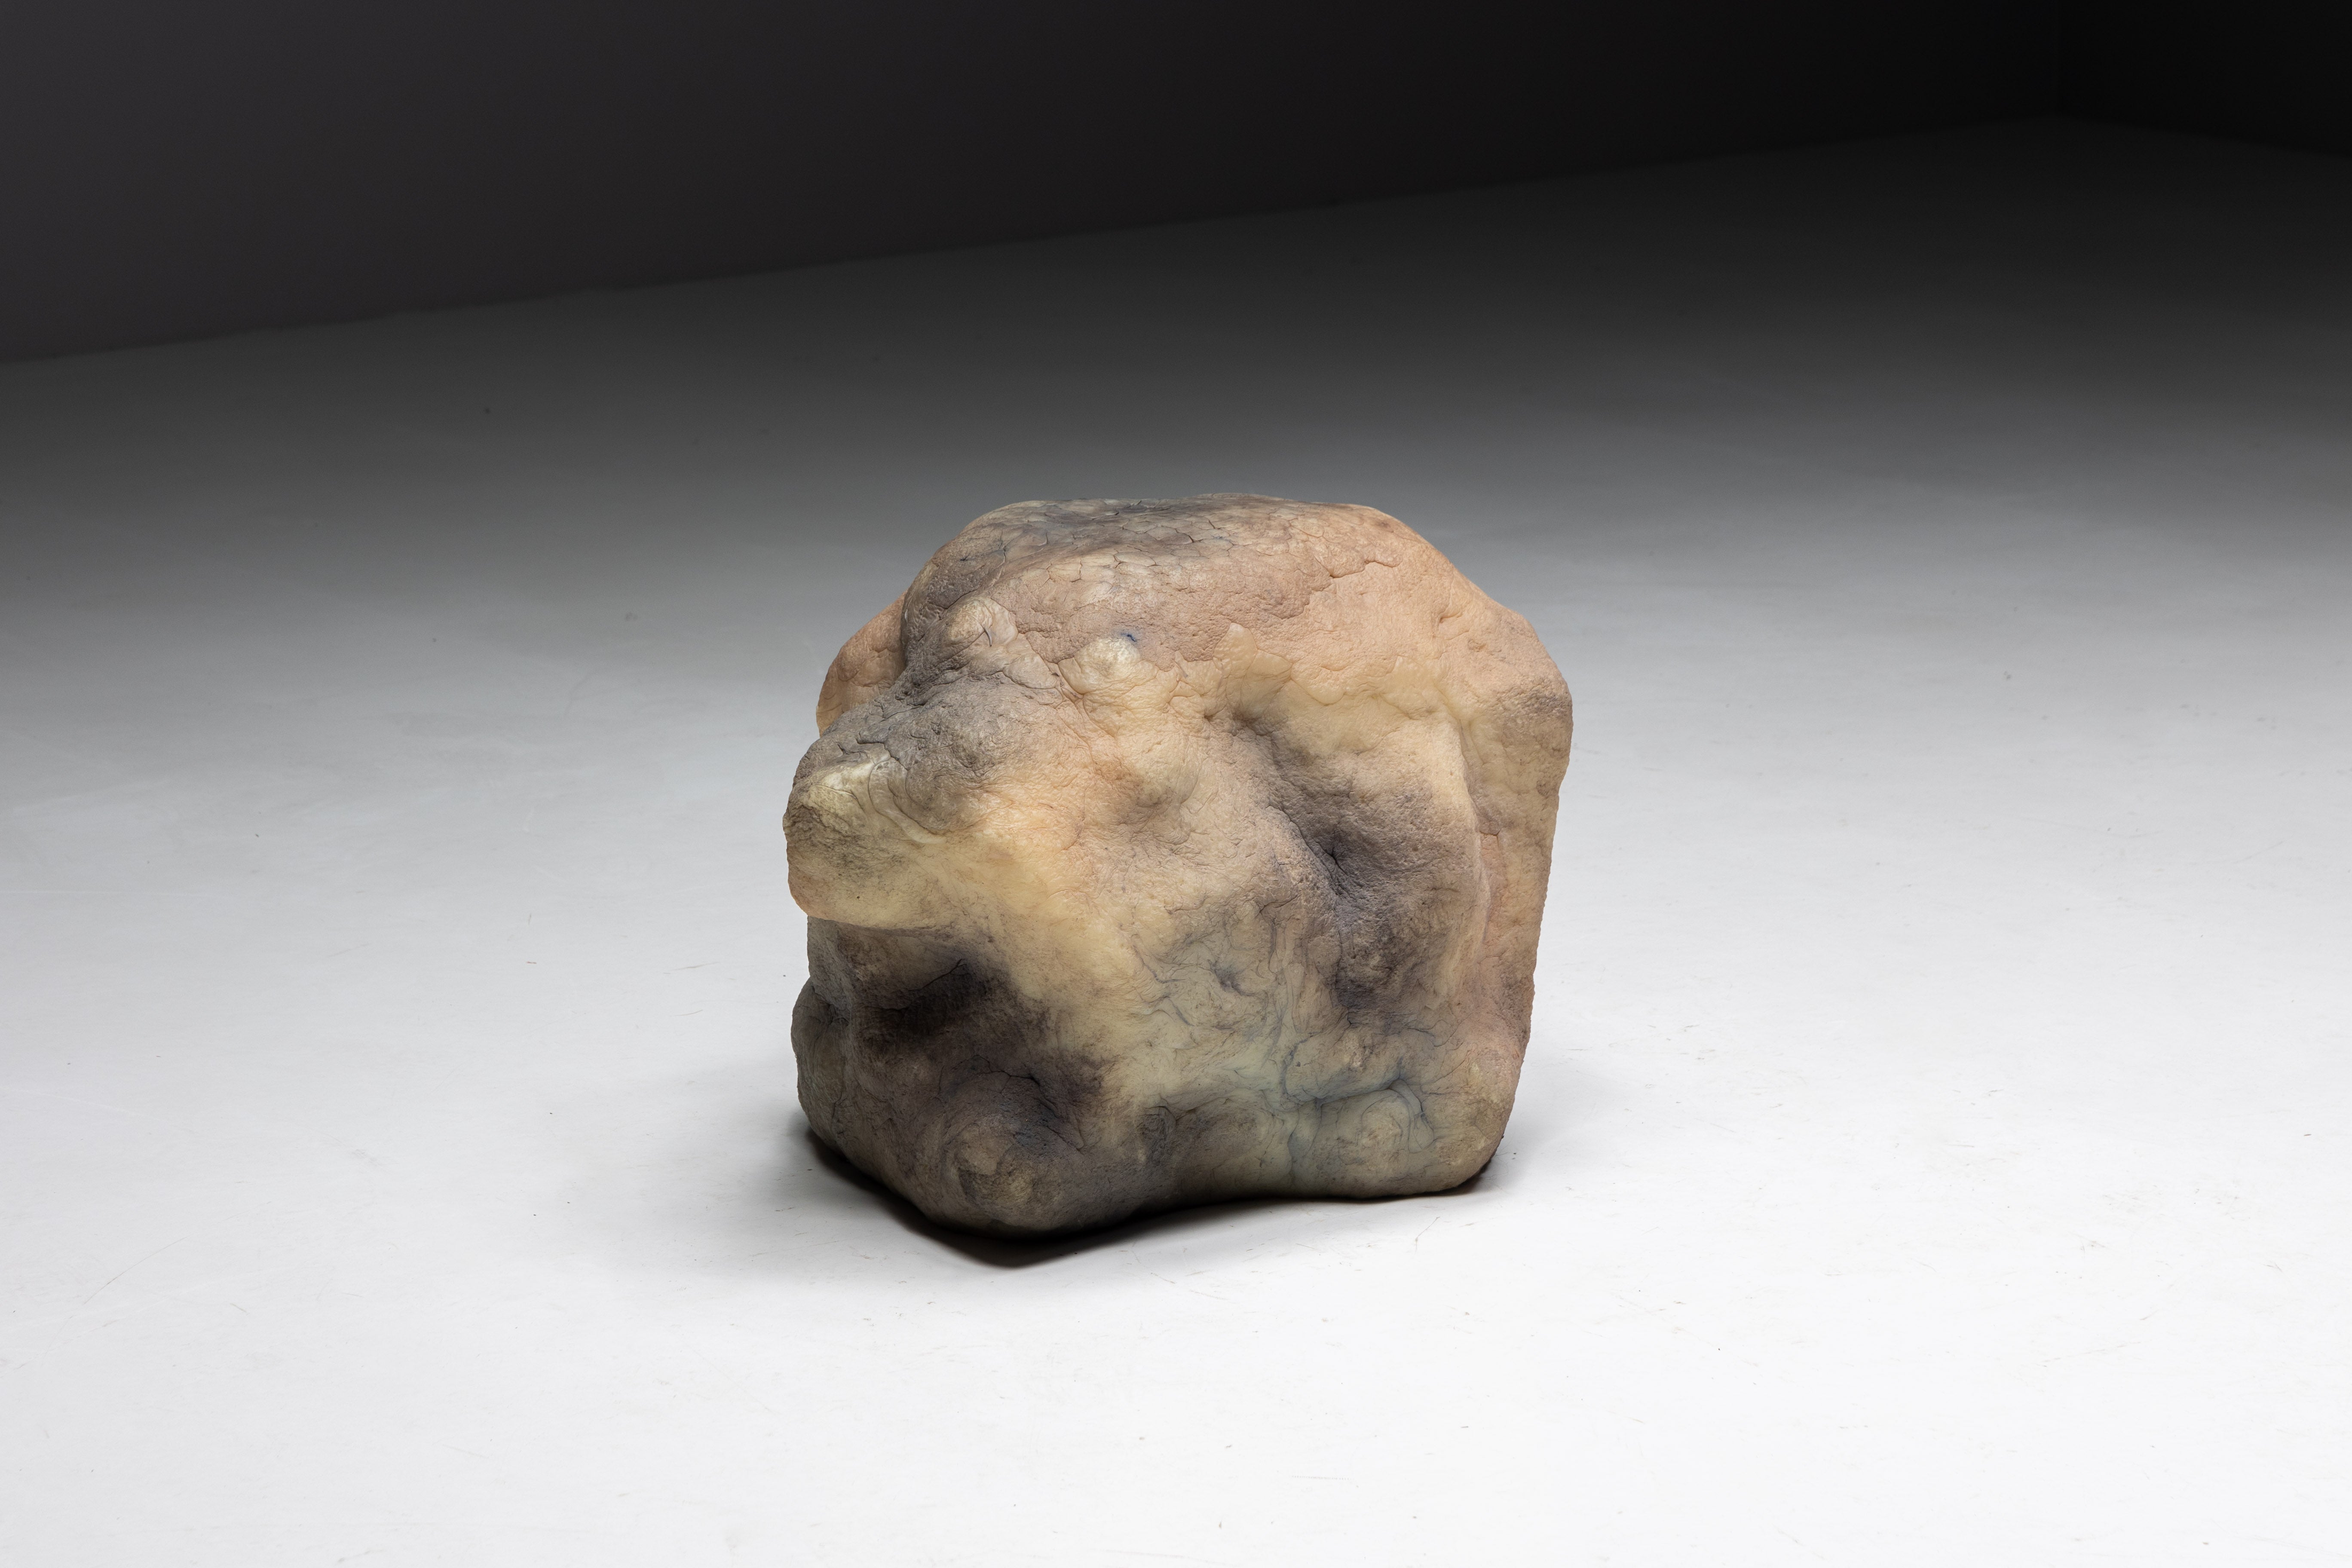 Elissa Lacoste's 'I Dream of Megalithic Times' series: Boulder Footstool, 2019. Composed of various speleothem-like shapes emerging from silicone skins infused with earthly pigments. This collection of functional art pieces challenges conventional